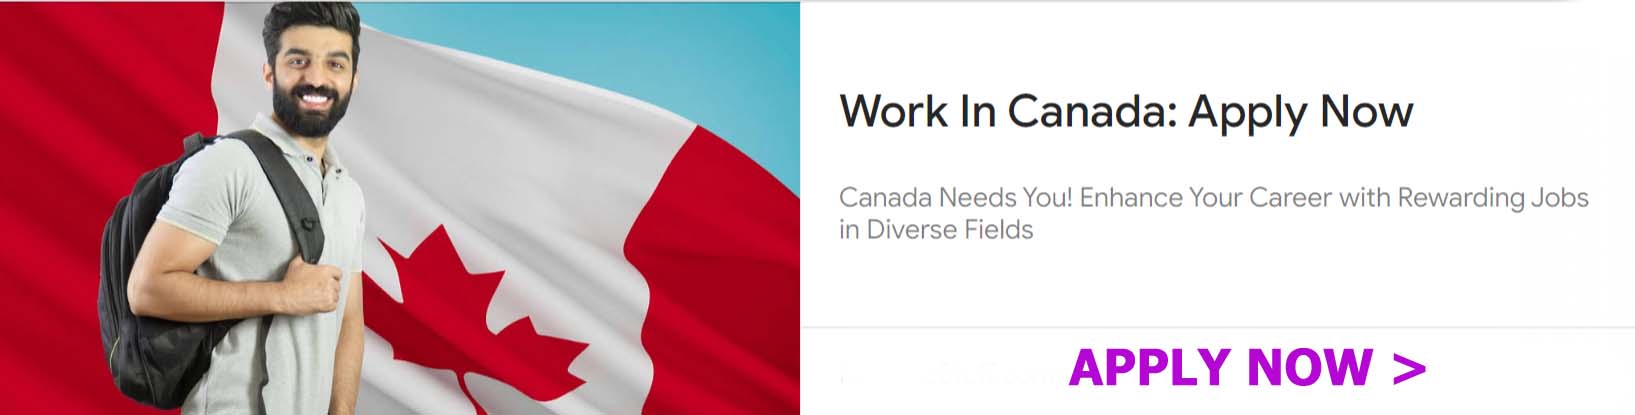 Work in Canada Apply Now